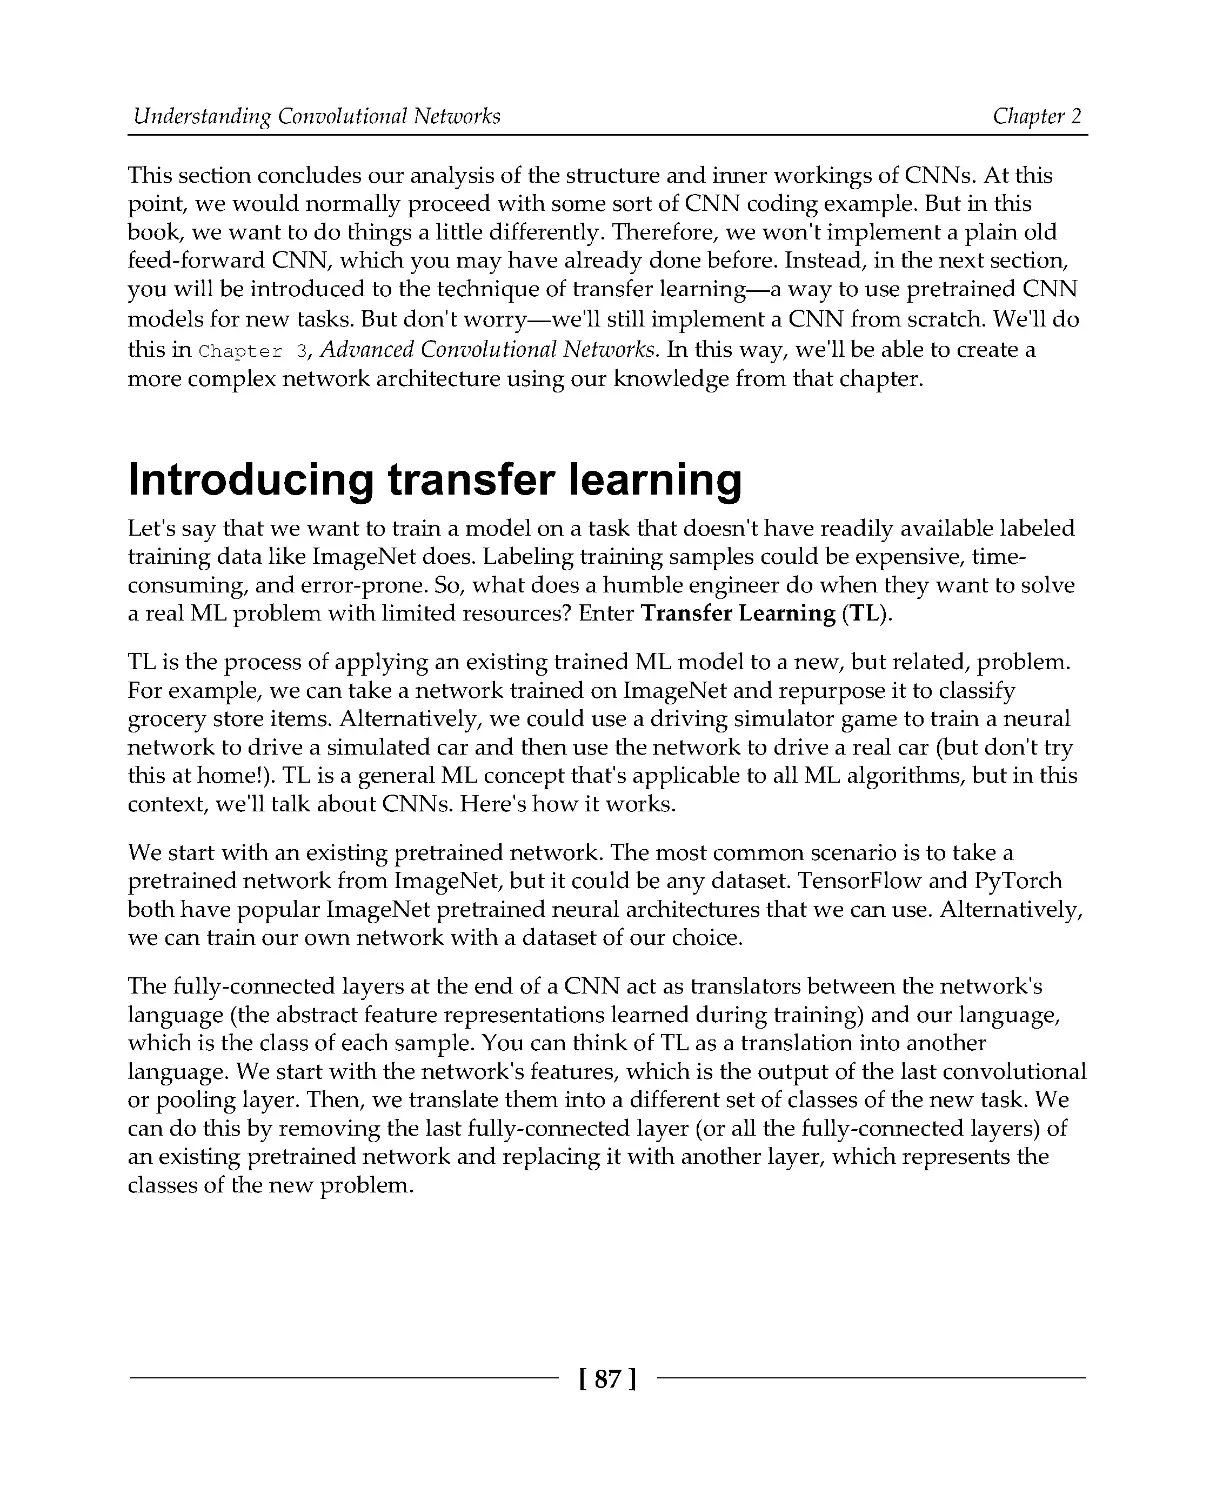 Introducing transfer learning